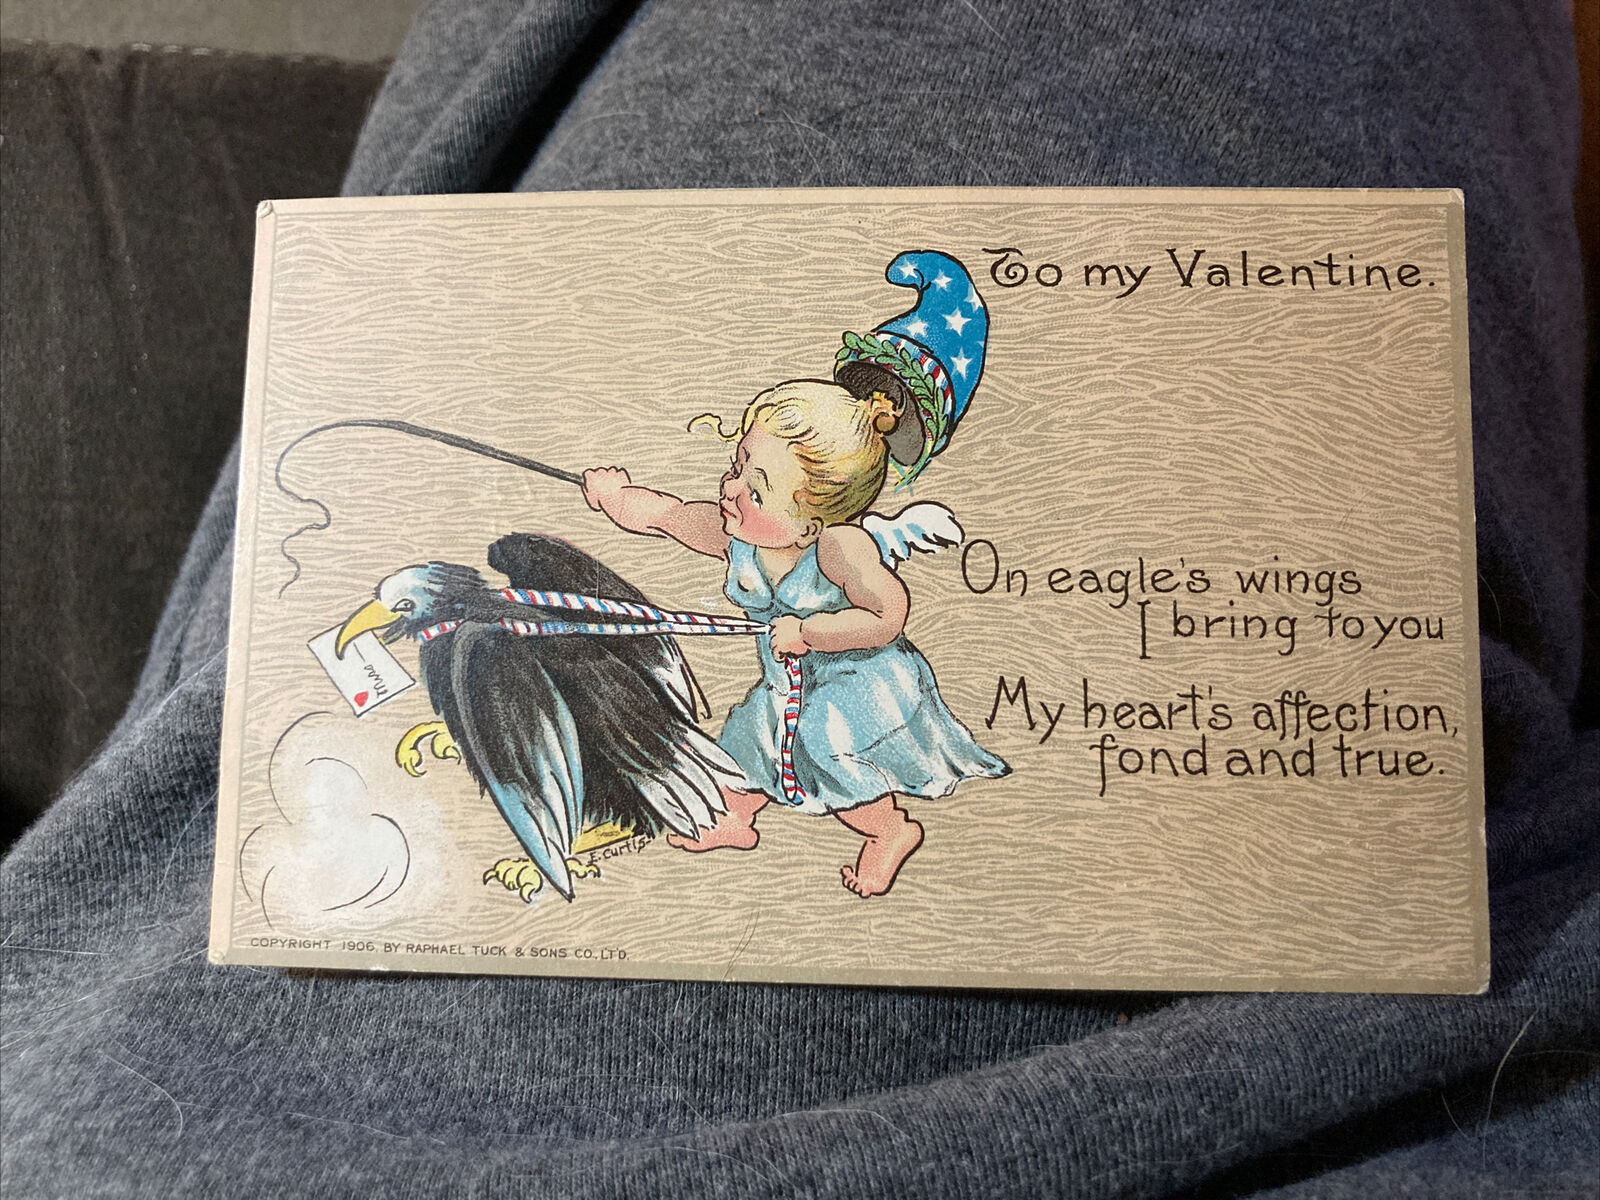 Tuck’s - To My Valentine w/ Child on Eagle - Poem - Signed by Artist E. Curtis